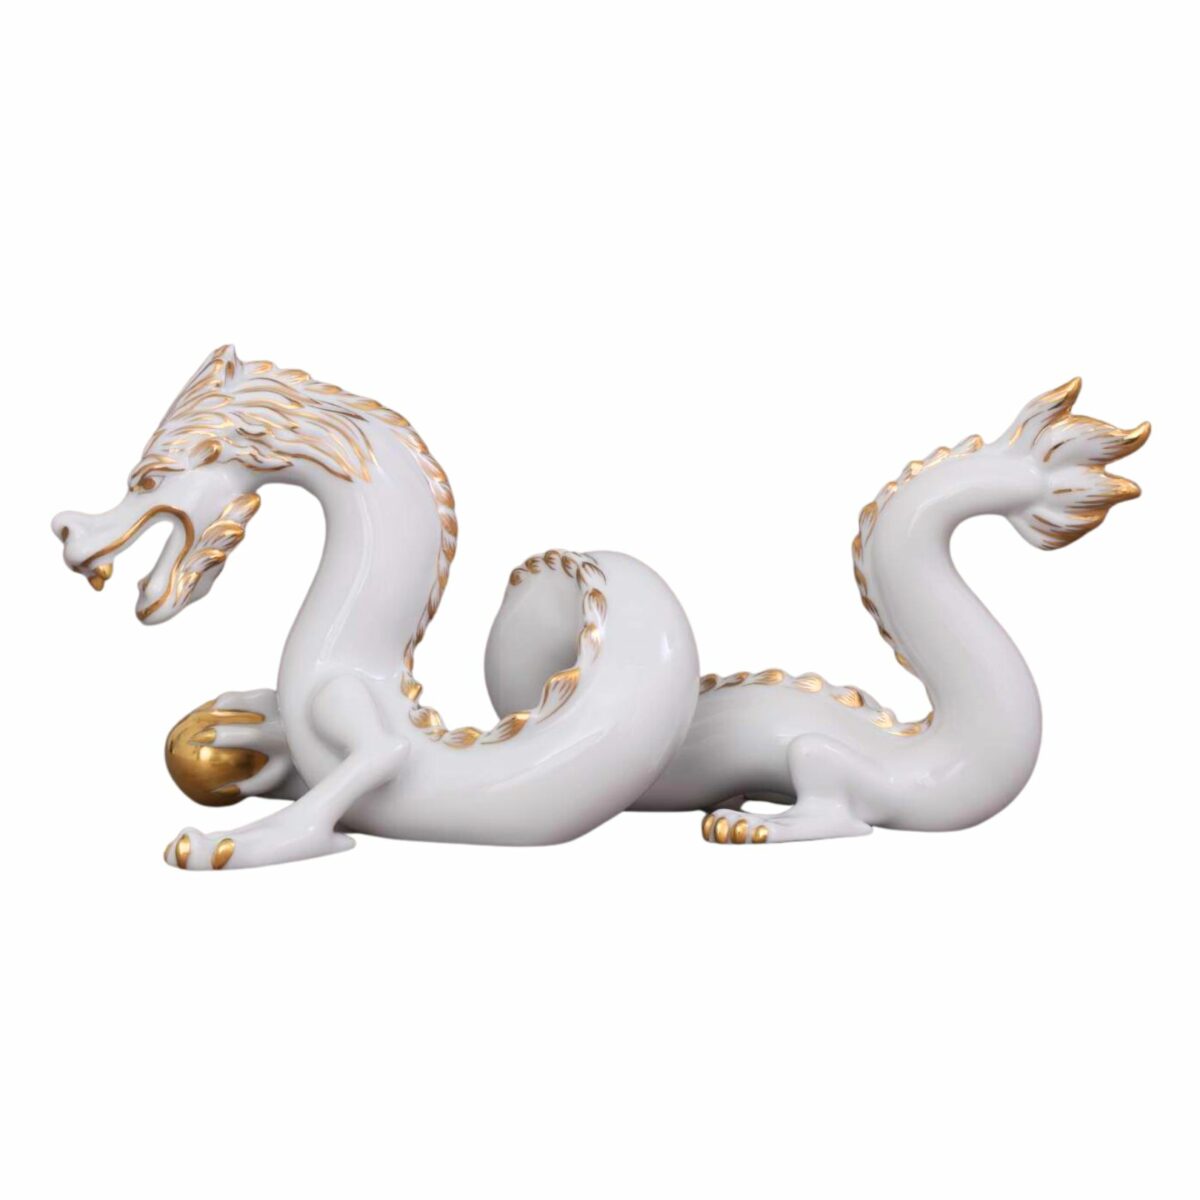 Herend-Dragon-Large-Figurine-White-Gold-15601-0-00-A-OR